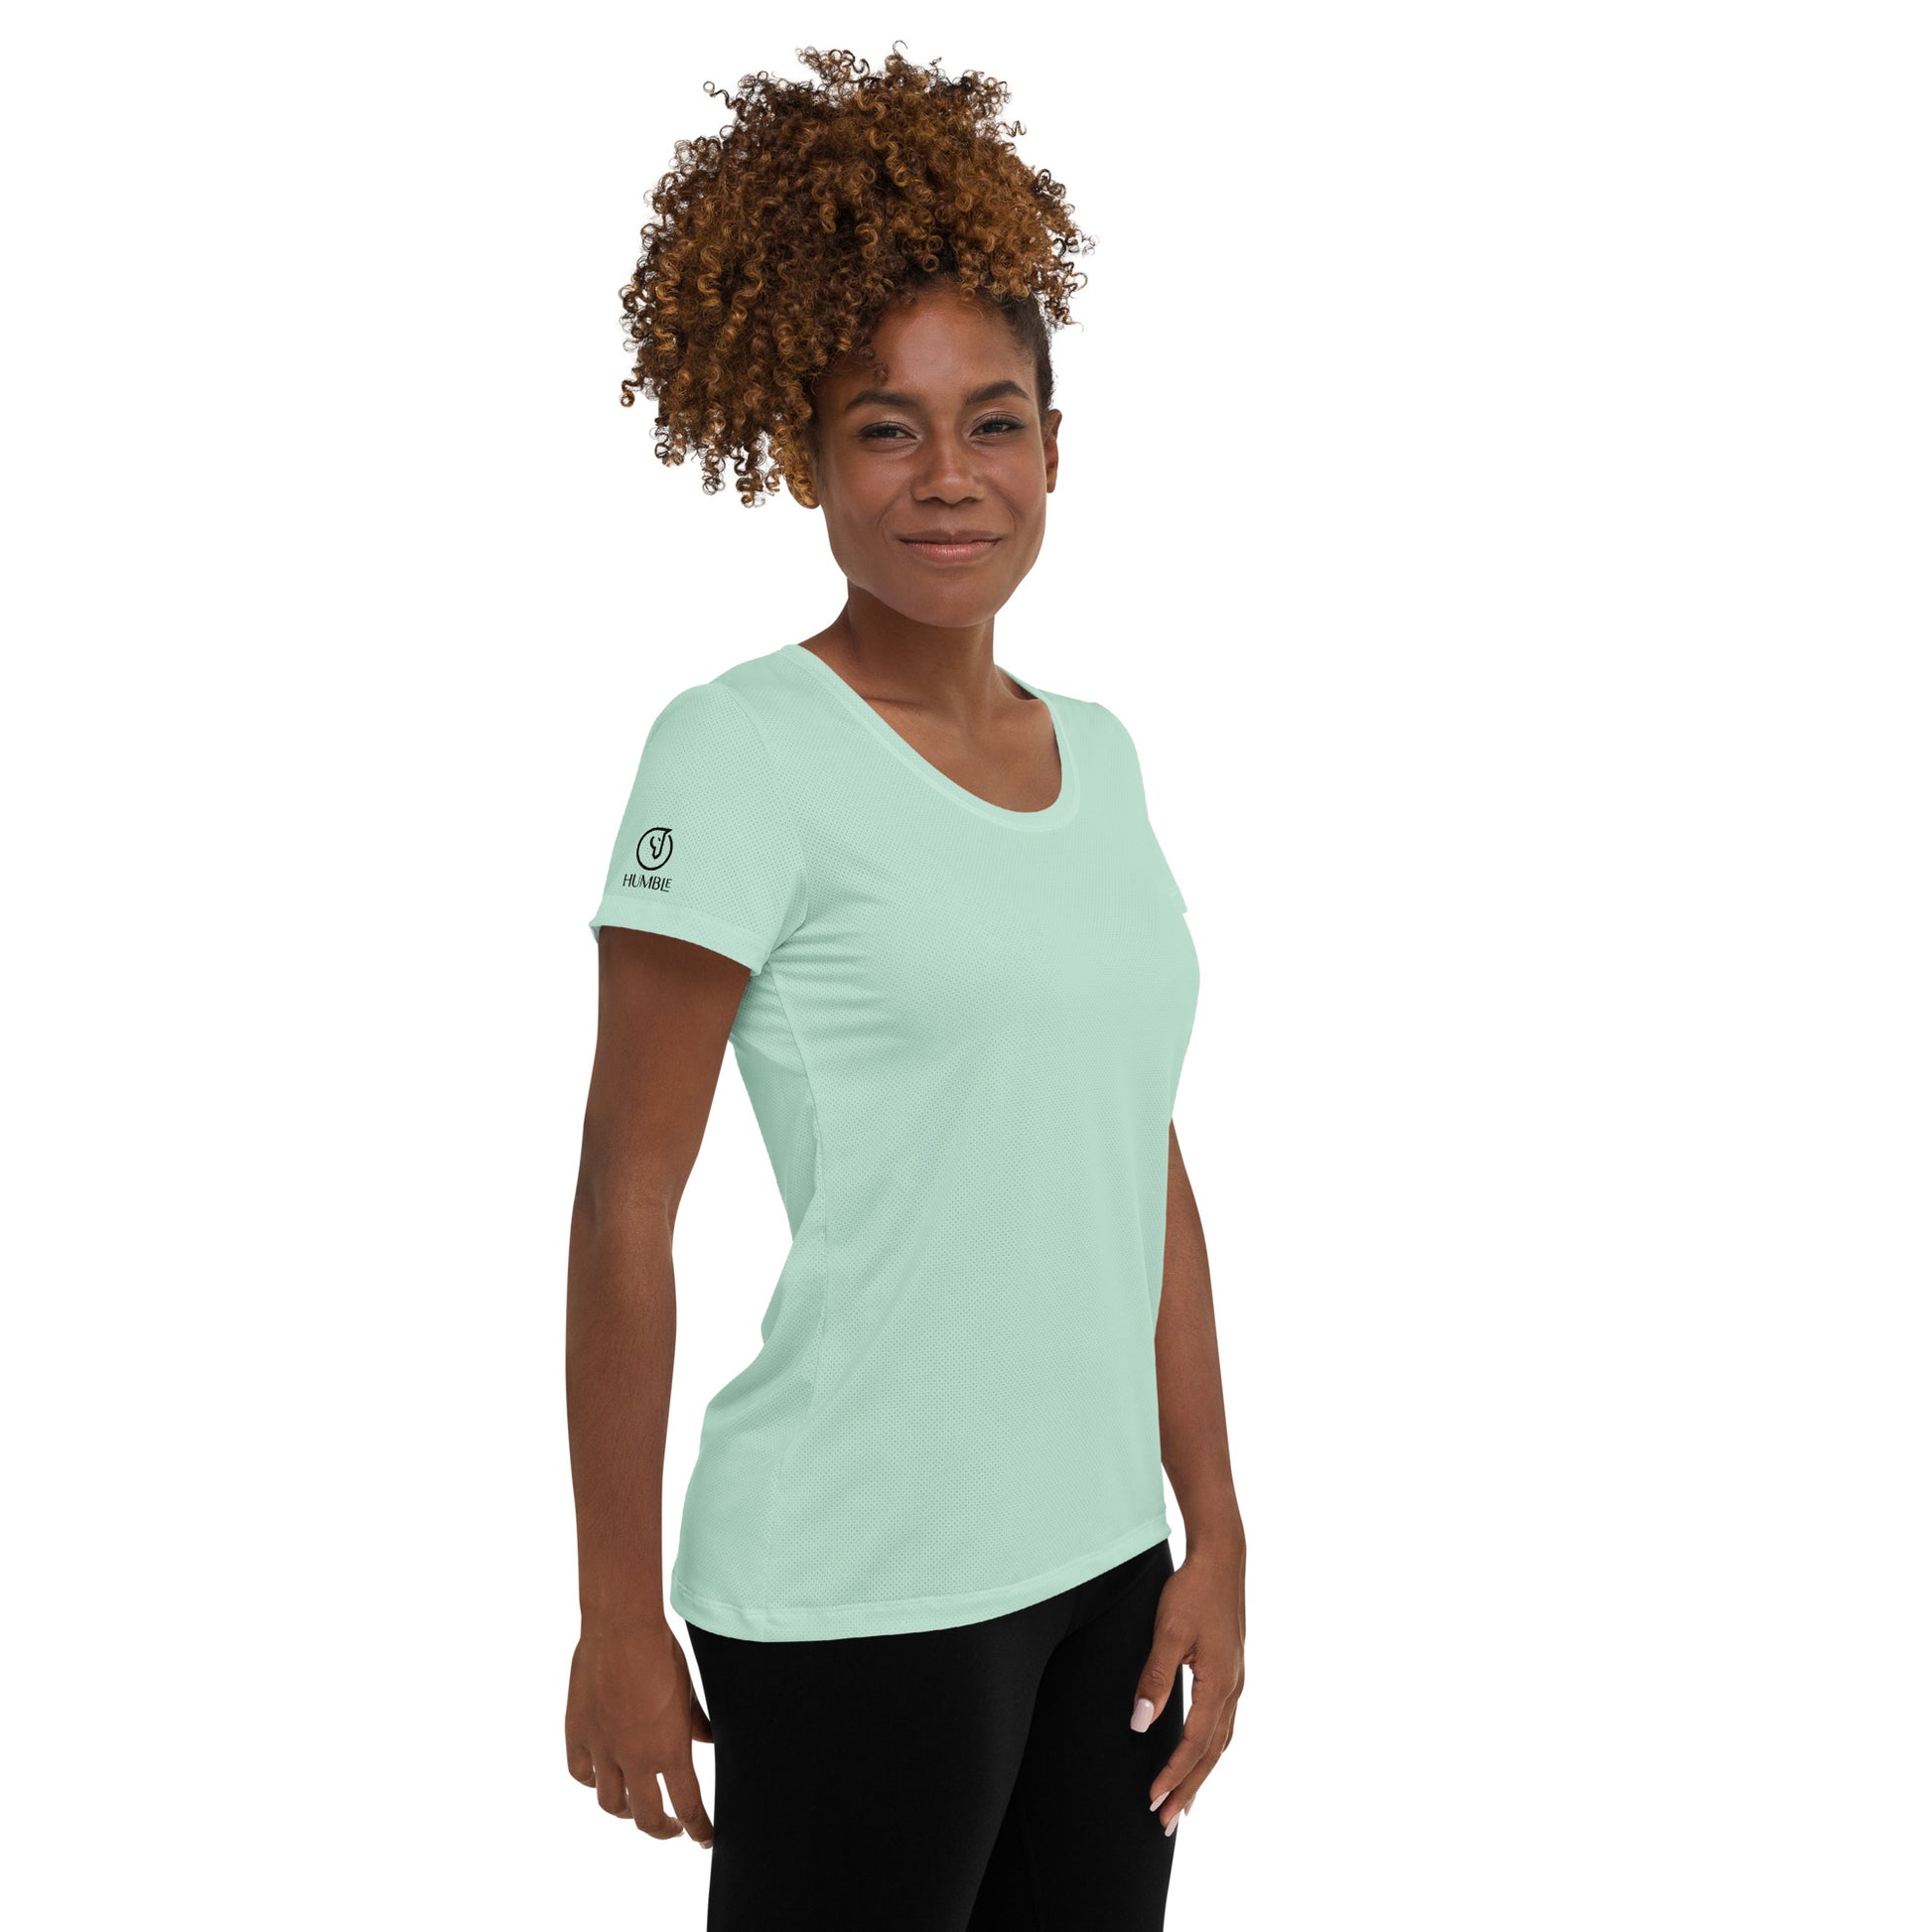 Humble Sportswear, women’s color match tops, workout tops, athletic shirts for women